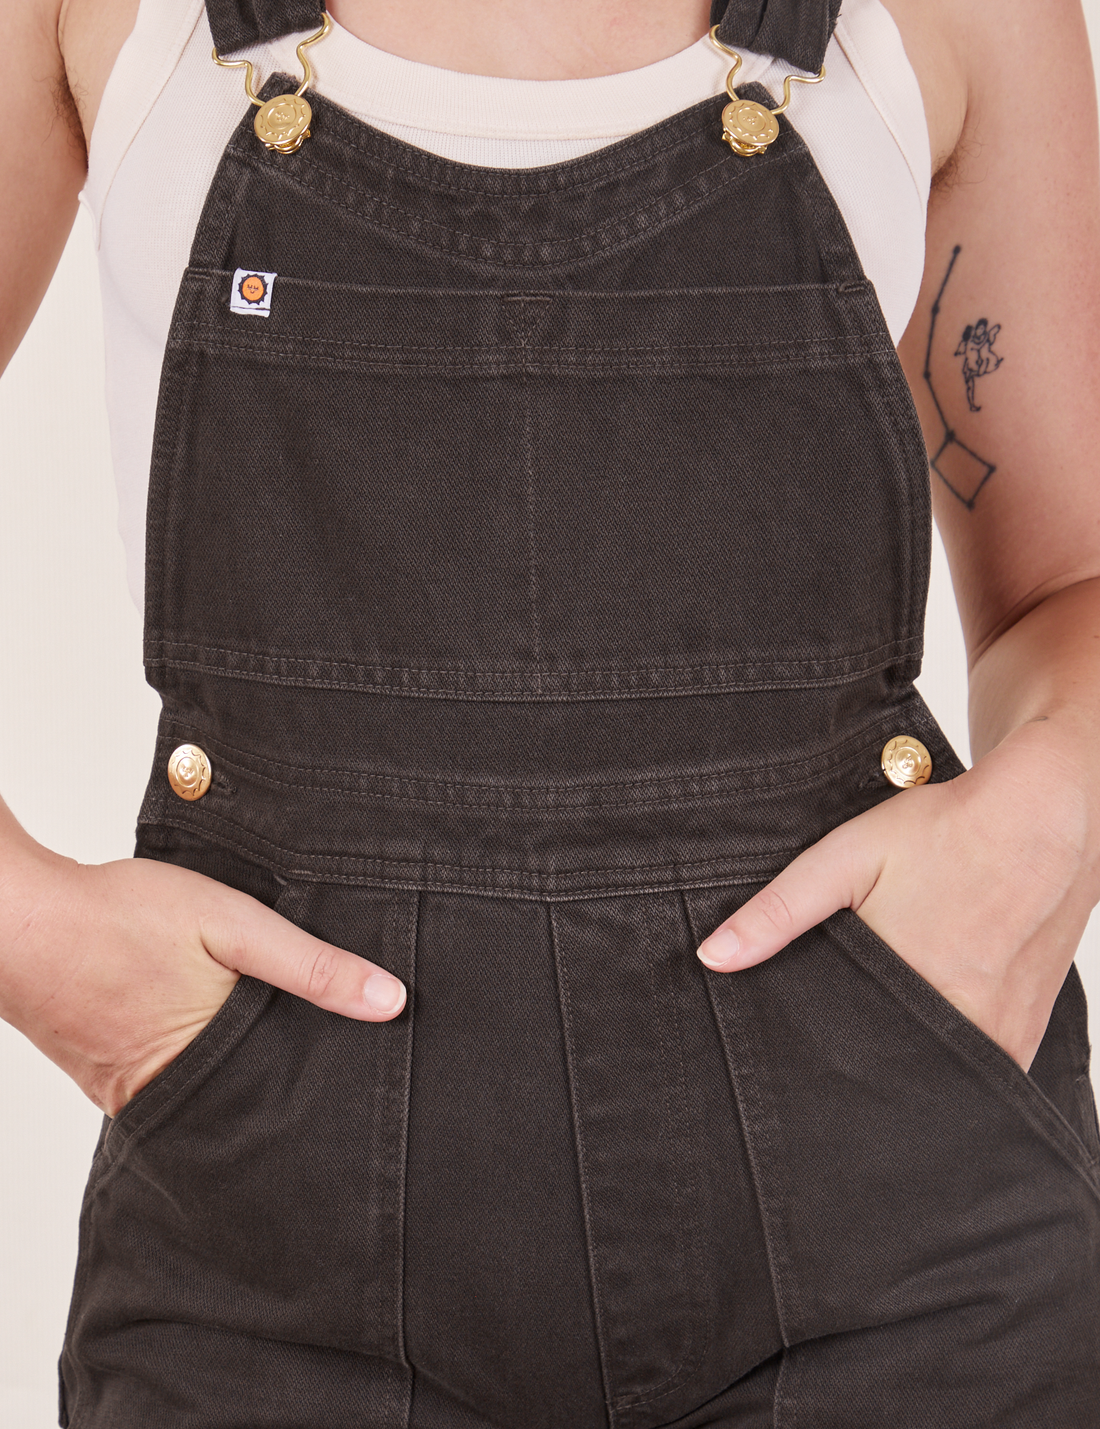 Front close up of Original Overalls in Mono Espresso. Alex has both hands in the front pockets.